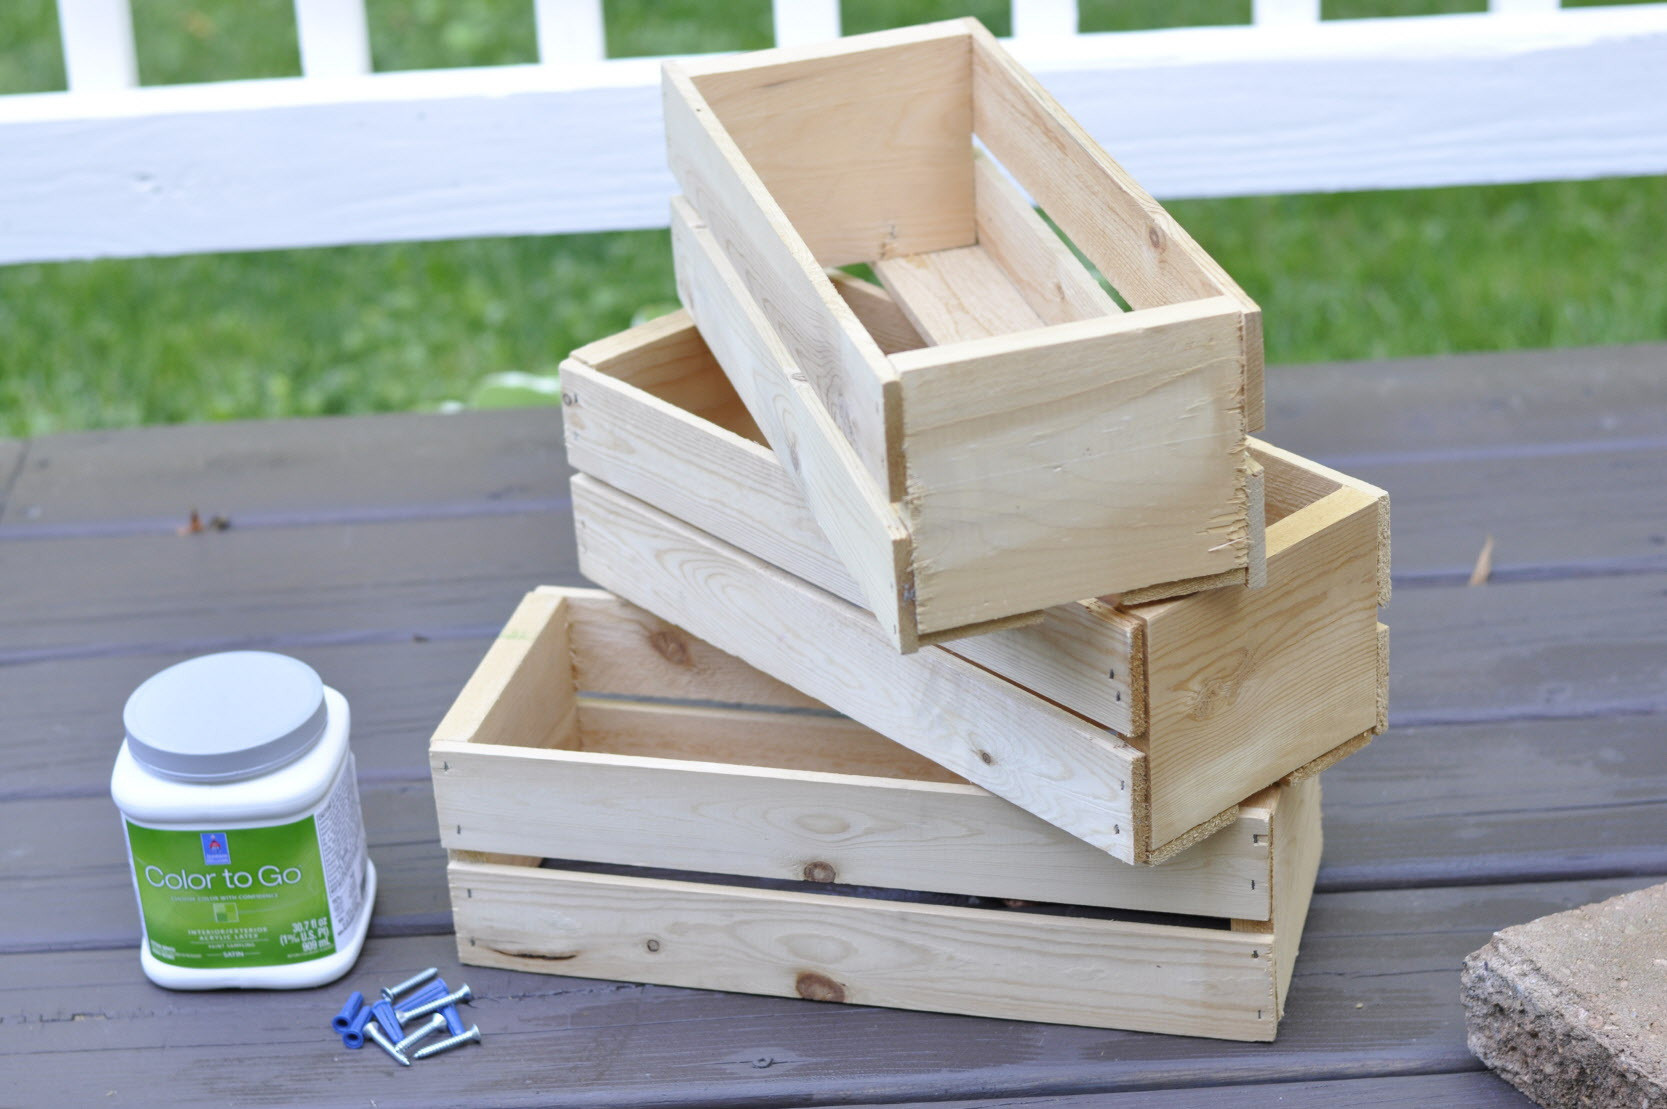 Wooden Crates DIY
 5 DIY projects using wooden crates